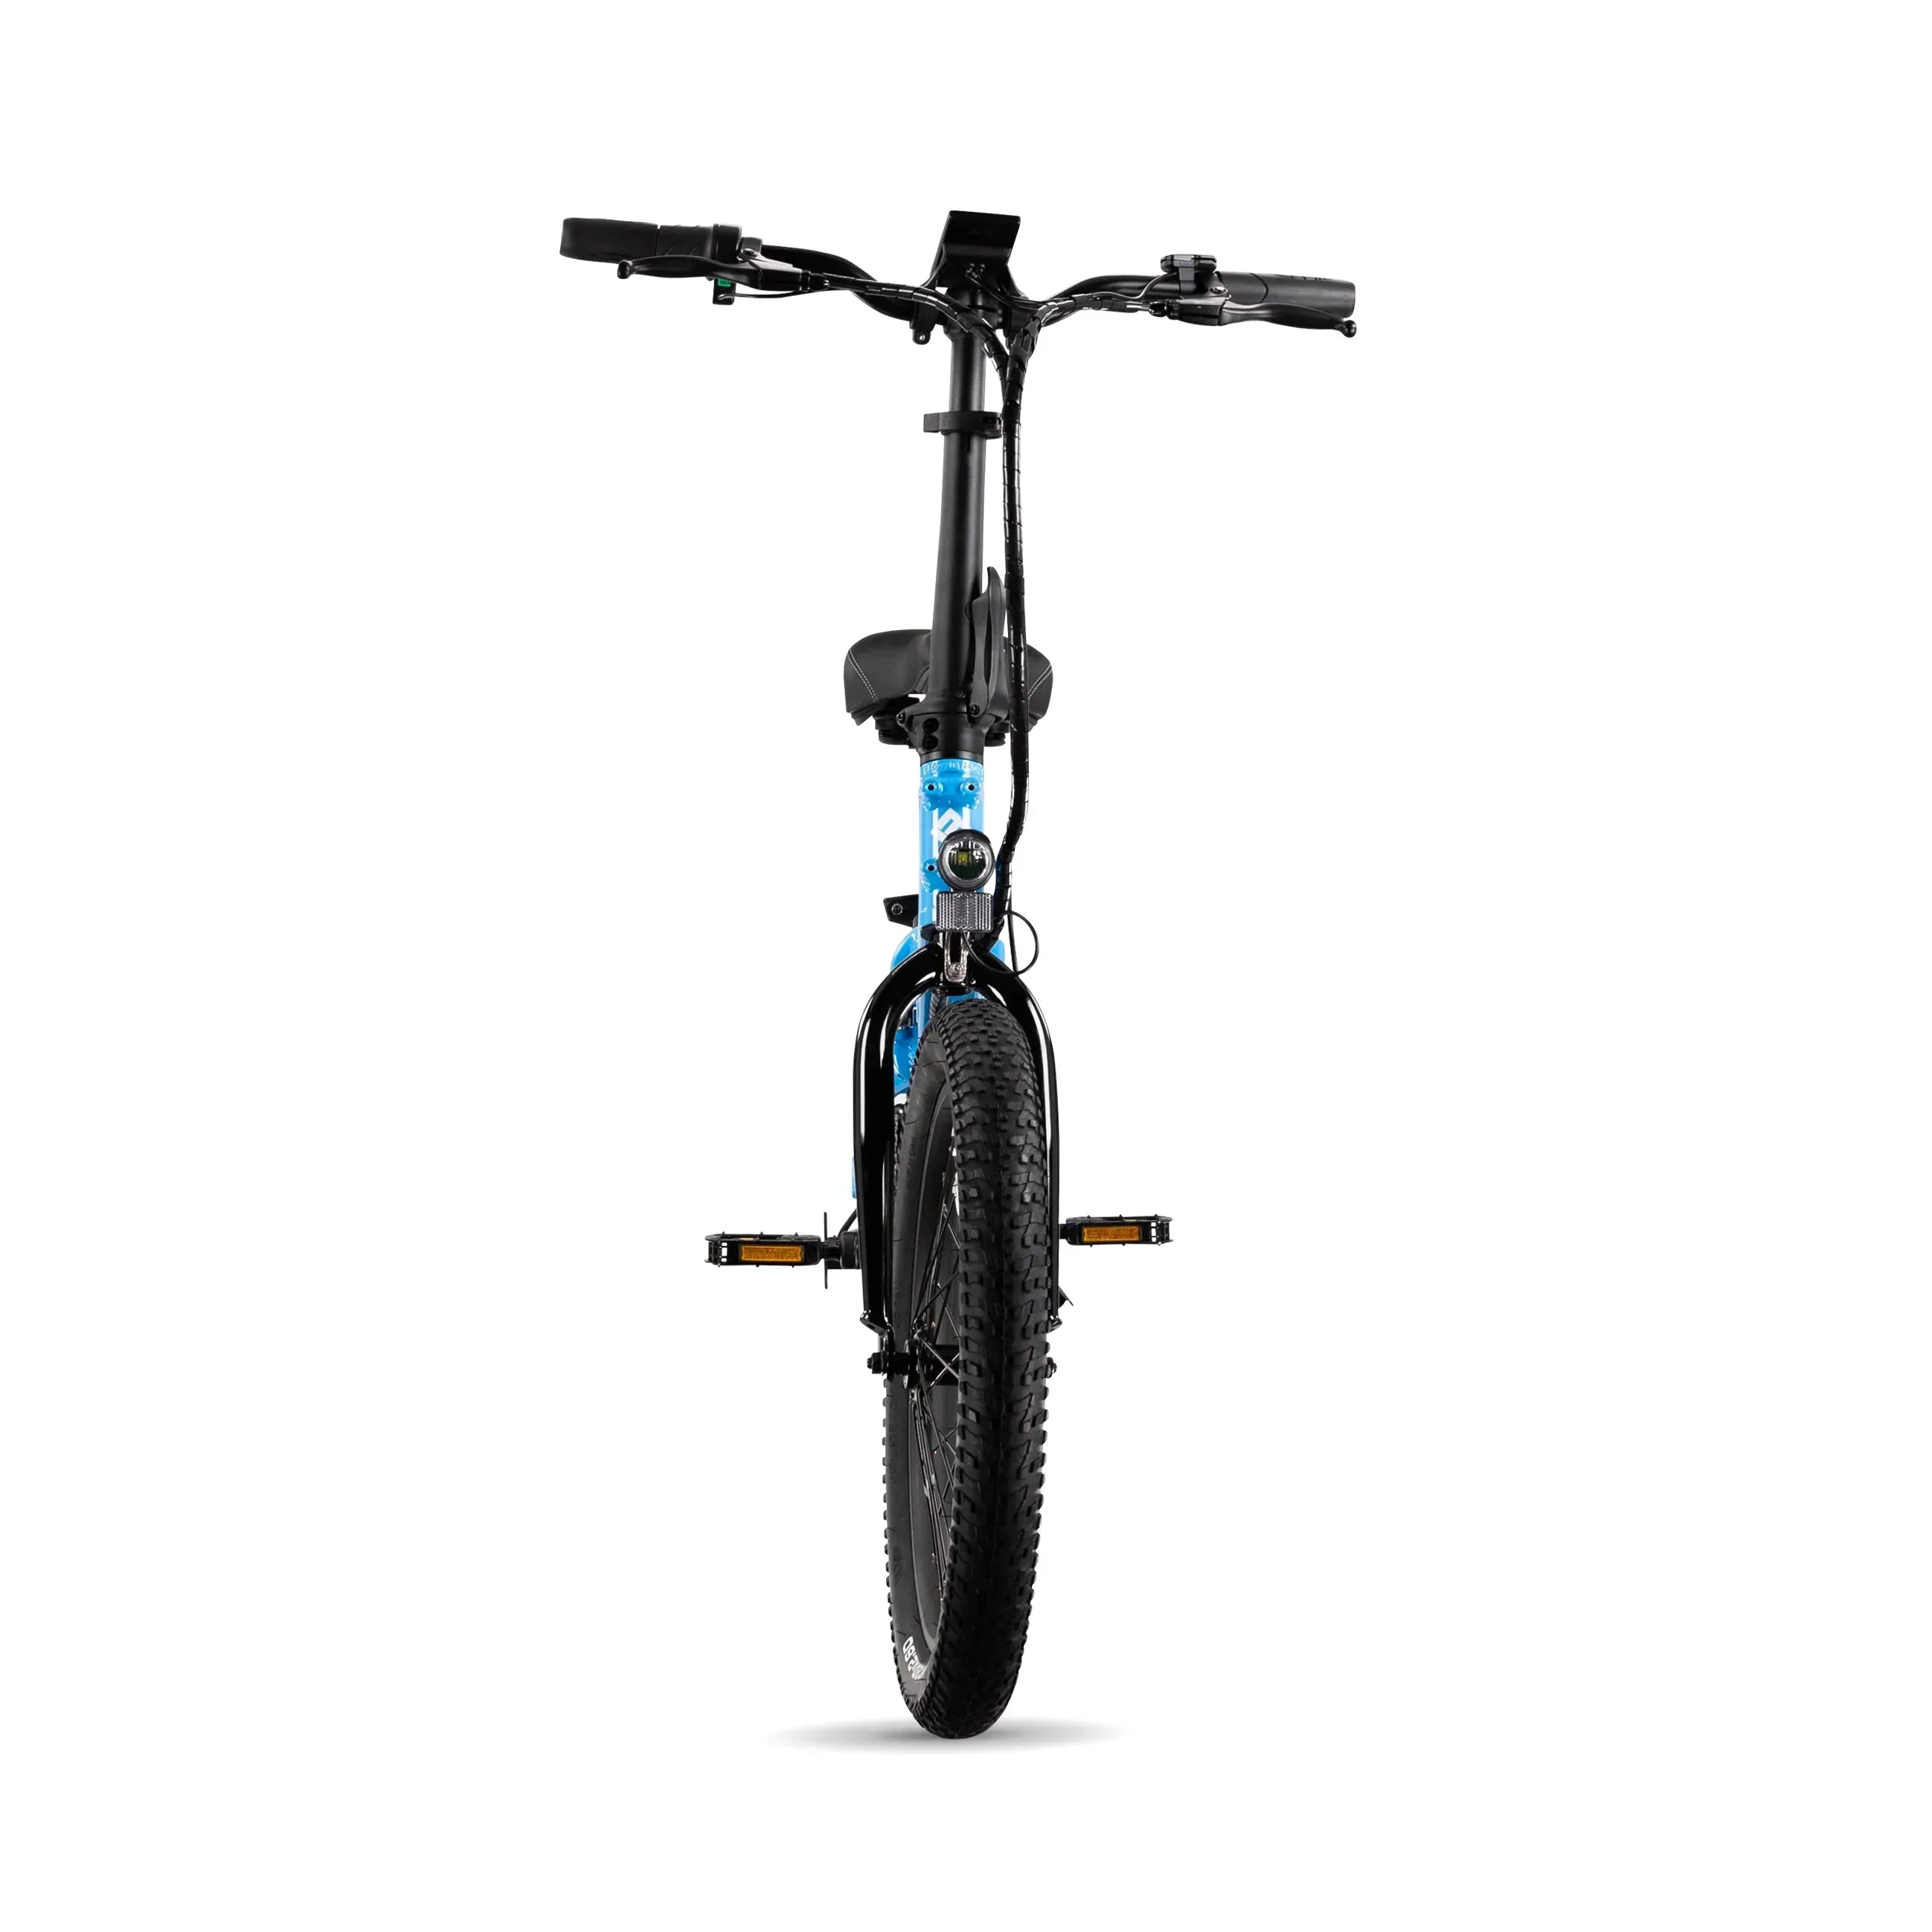 Lectric XP Lite eBike | Adult Folding Electric Bicycle | Best Affordable Lightweight Class 2 Fat Tire Electric Bike in Lectric Blue w/ Pedal Assist